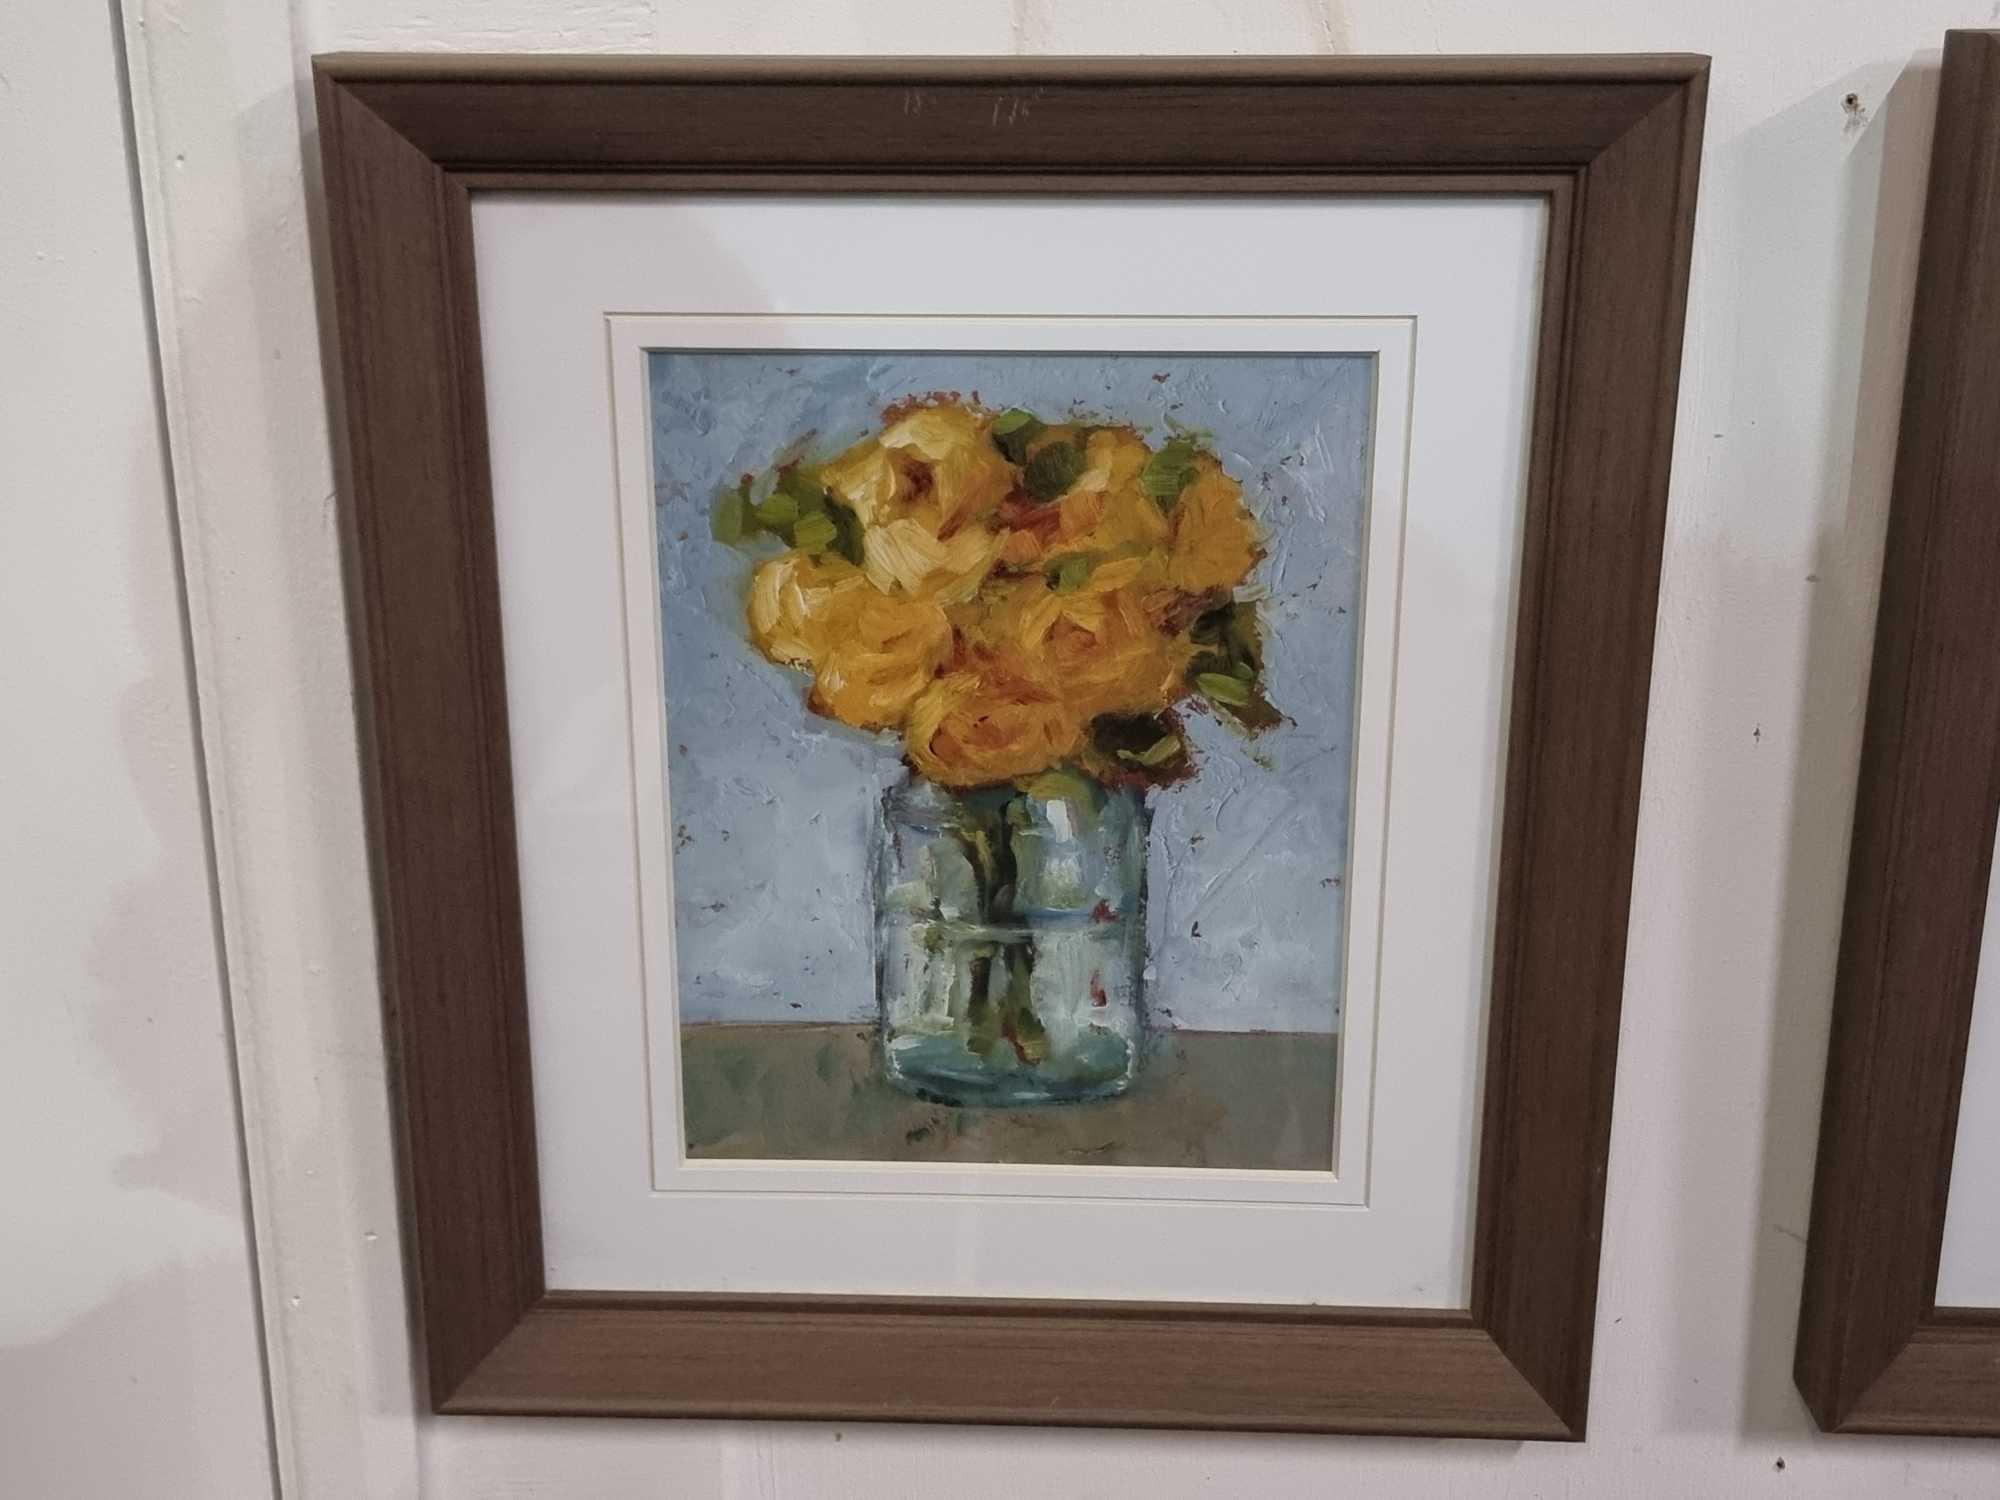 A Set Of Two Prints Depicting Still Life Watercolour Paintings Of Flowers In A Glass Jar In Modern - Image 3 of 4